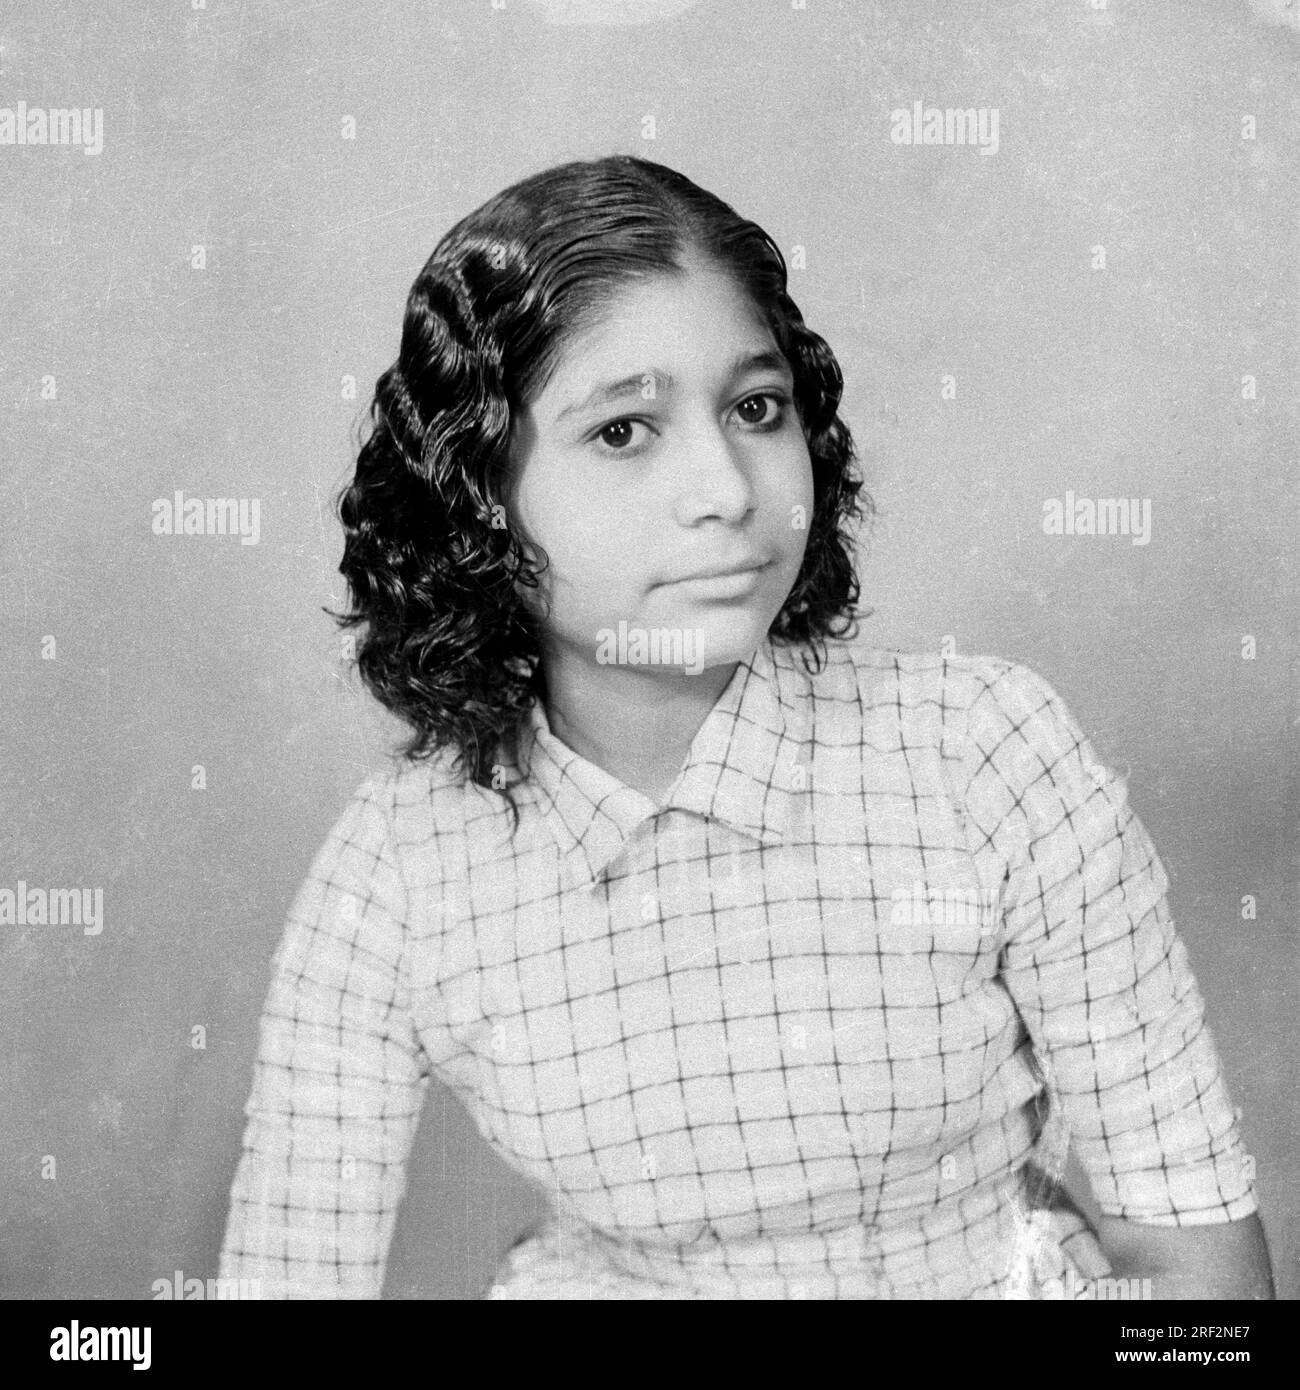 old vintage 1900s black and white studio portrait of Indian girl with short hair India 1940s Stock Photo